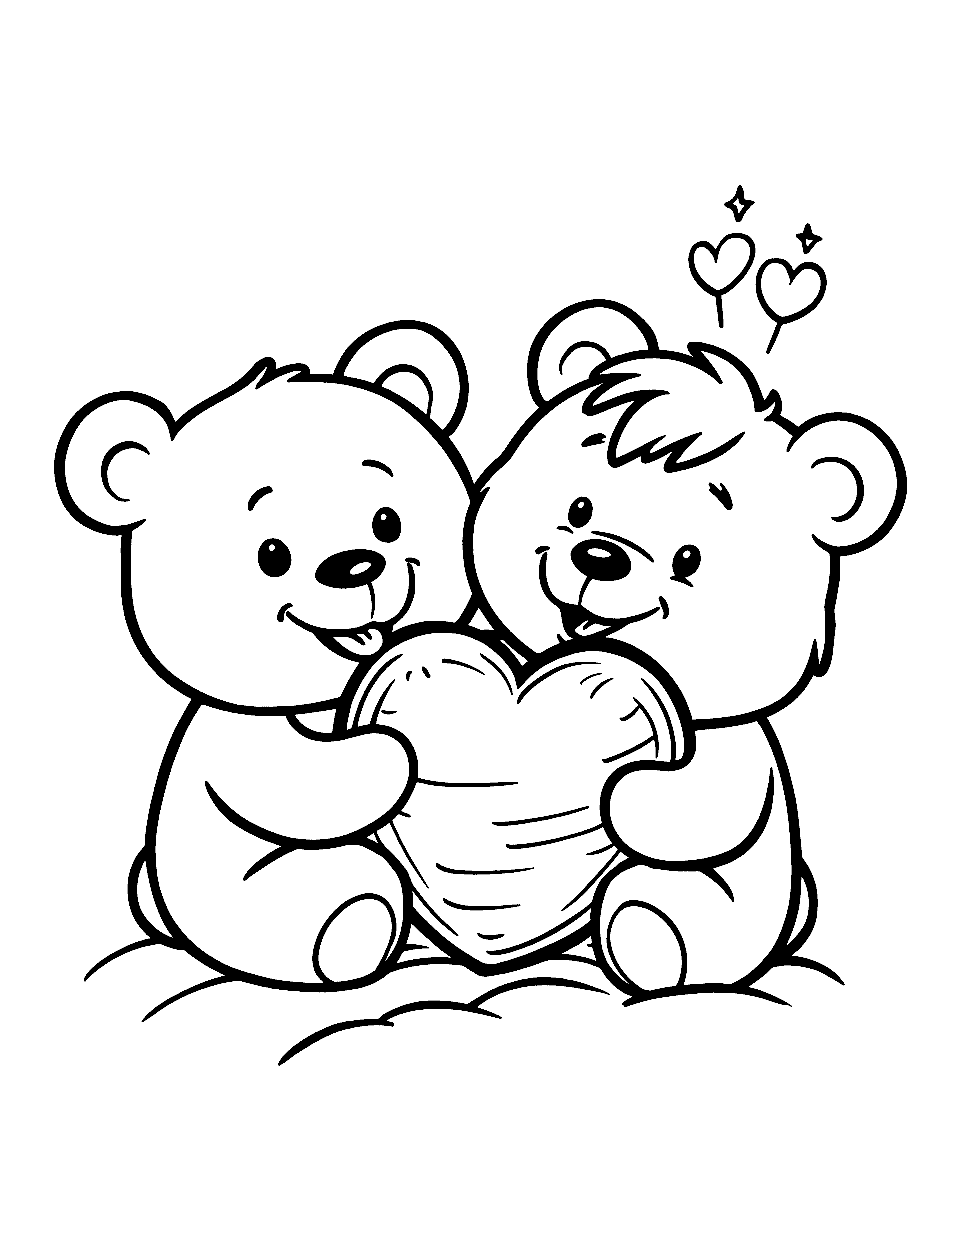 Teddy Bear Sharing a Heart Coloring Page - Two teddy bears holding a large heart together.